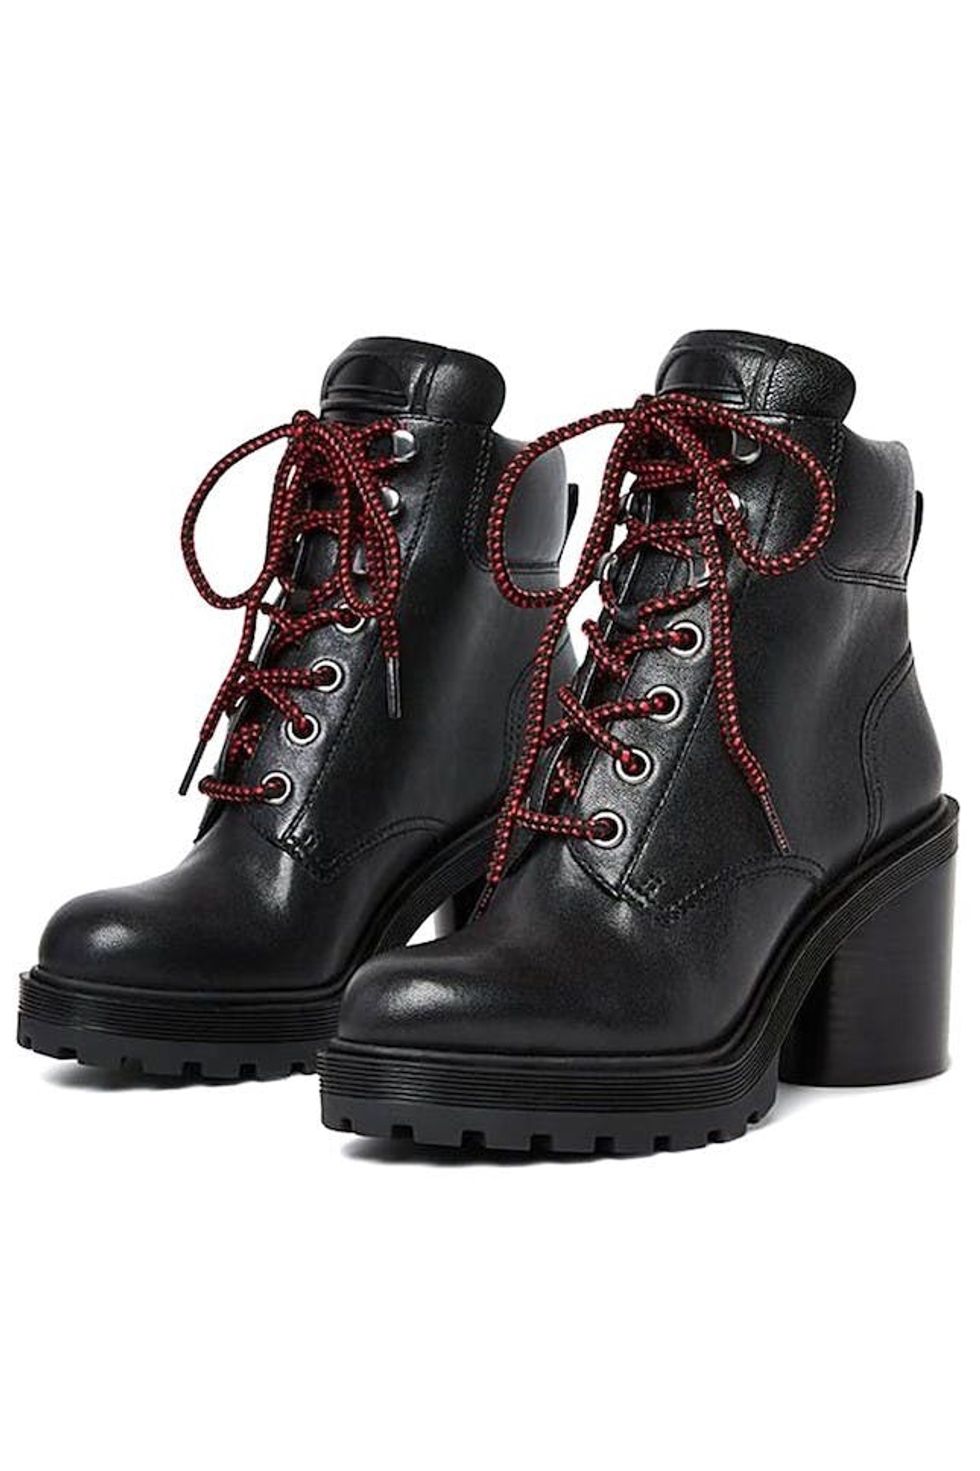 16 Stylish Combat Booties to Step into Winter With Style - Brit + Co